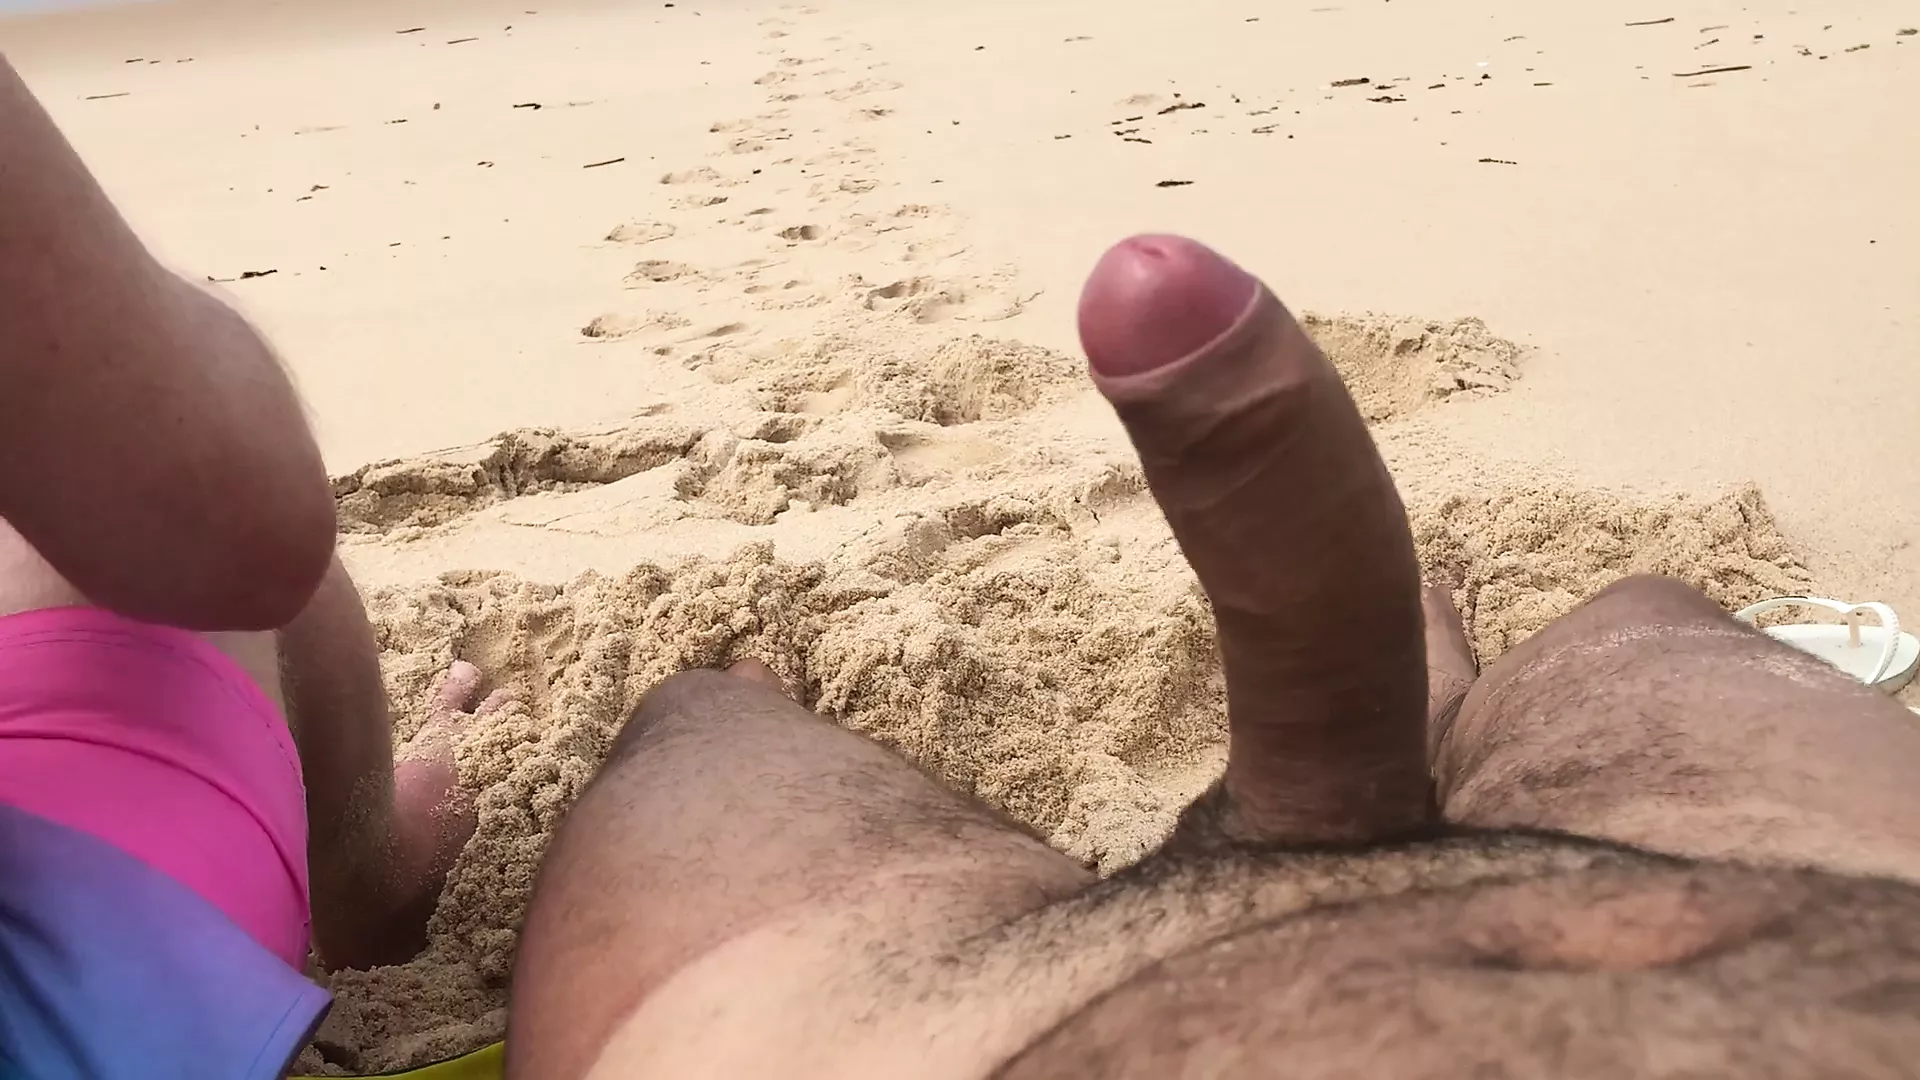 My straight friend touch my dick in the beach